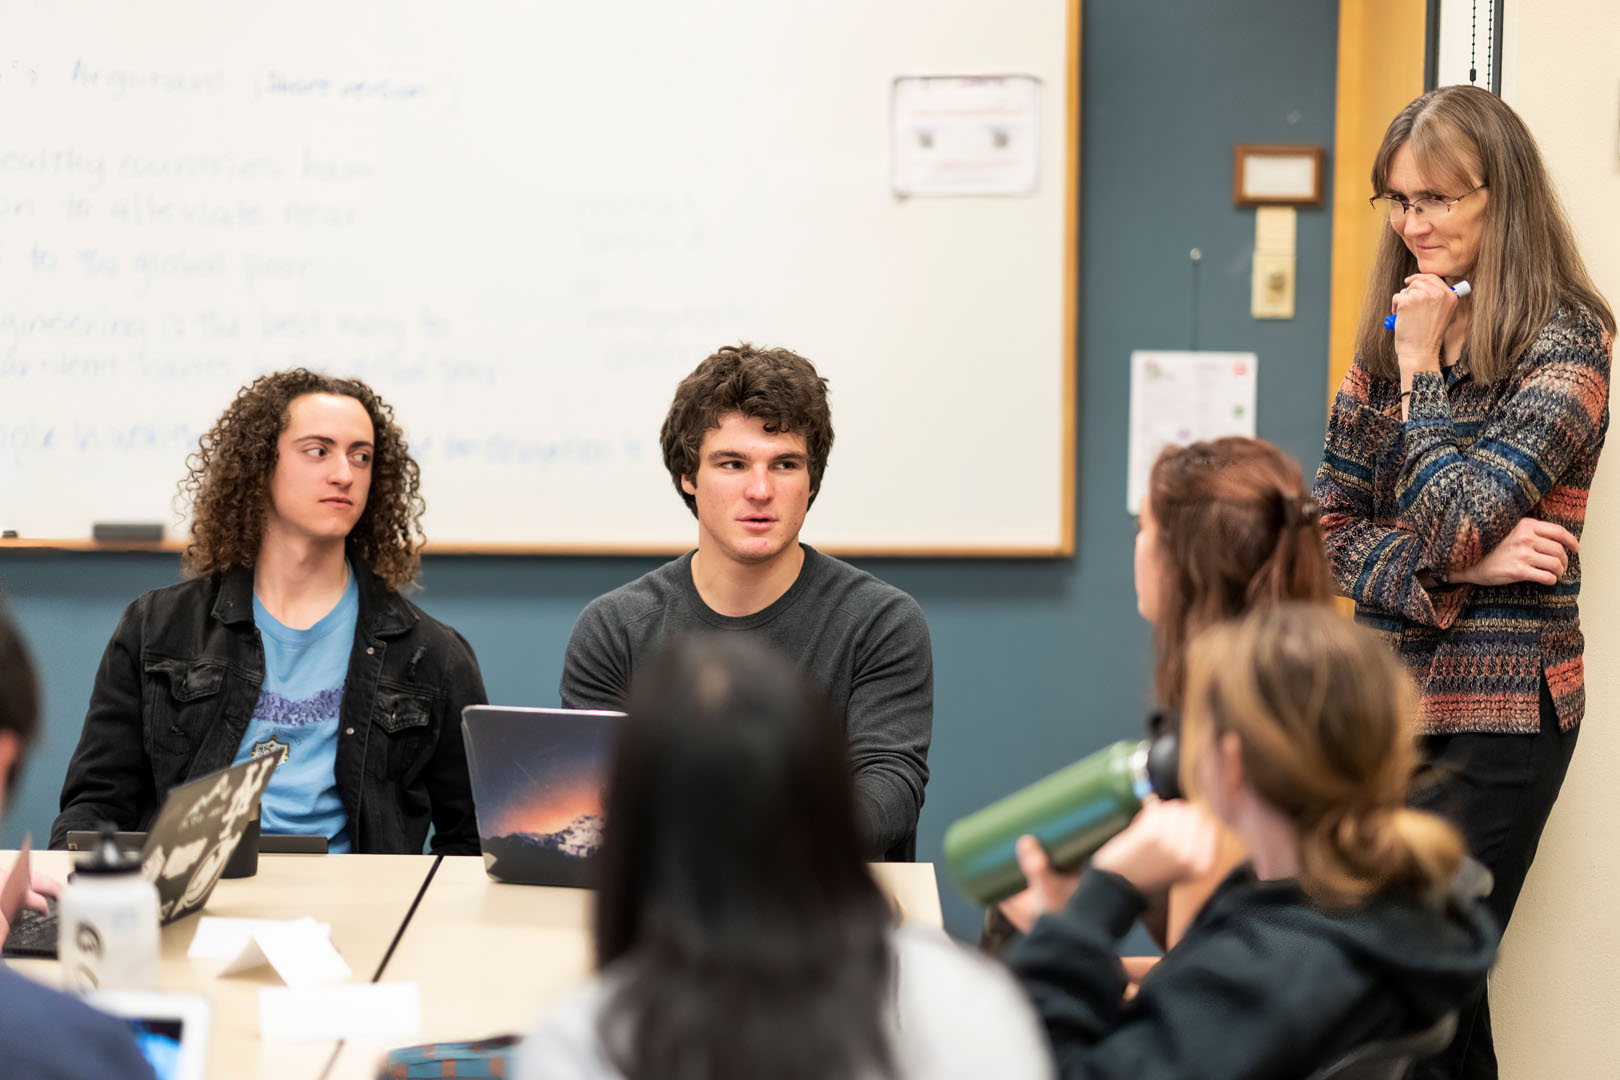 Students in Block 6 Contesting Climate Justice are pictured debating climate policy during a class meeting on March 15, 2023. Photo by Lonnie Timmons III / Colorado College.